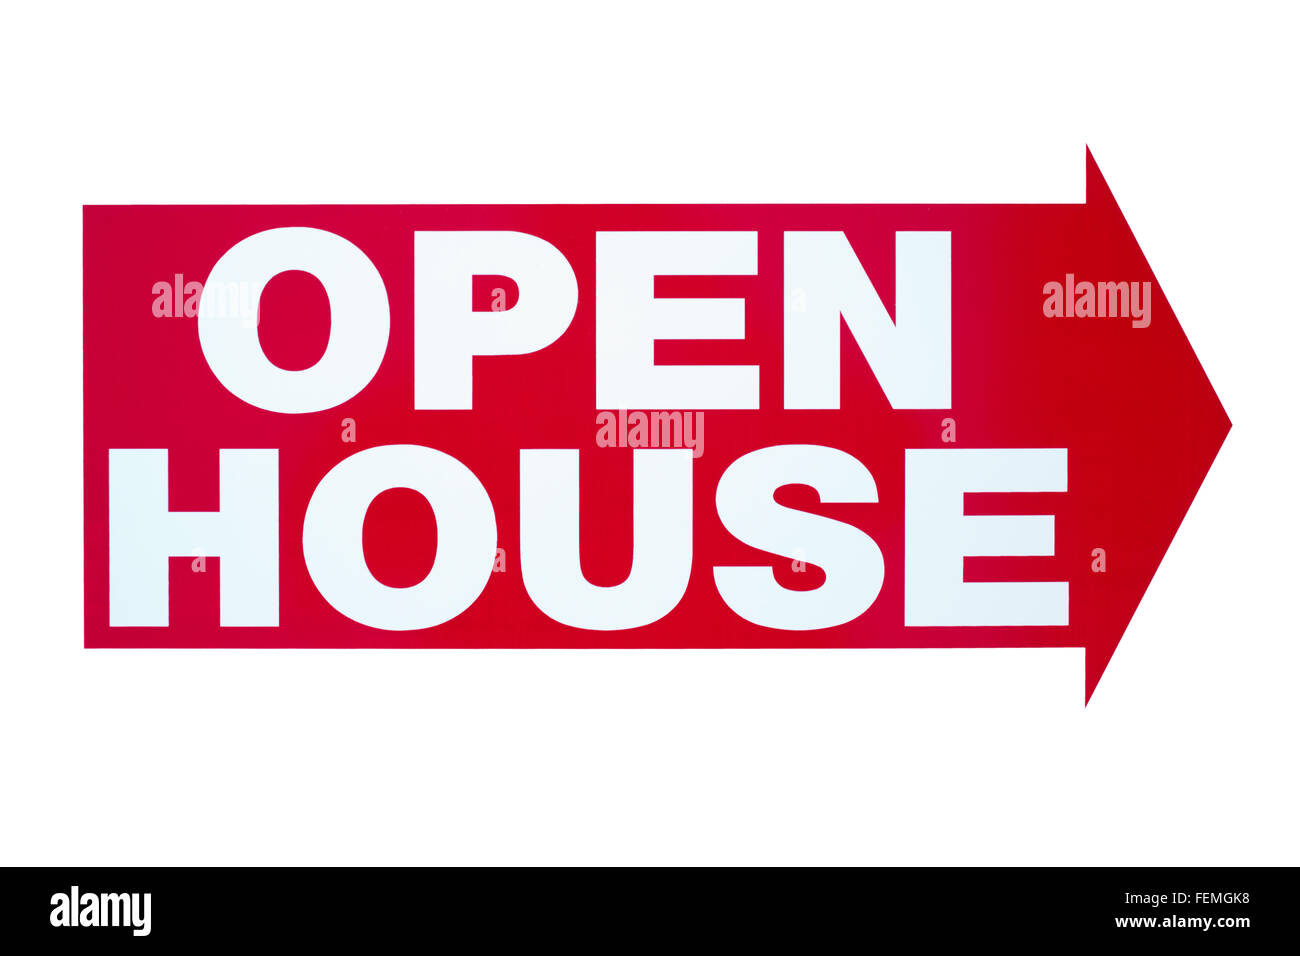 Open House Real Estate Sign Isolated on White Stock Photo